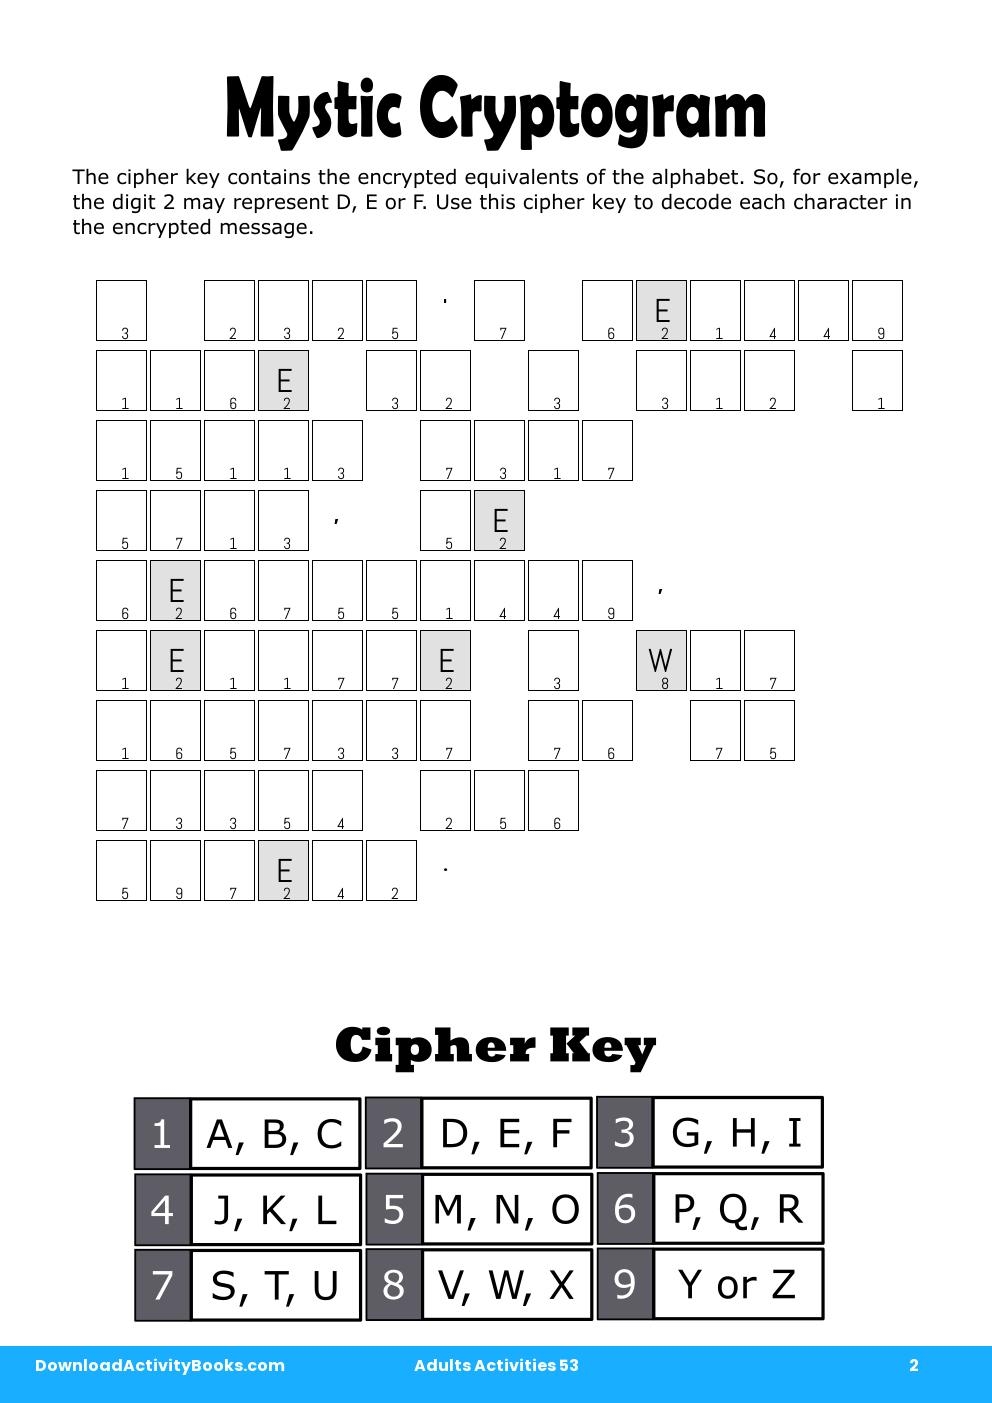 Mystic Cryptogram in Adults Activities 53